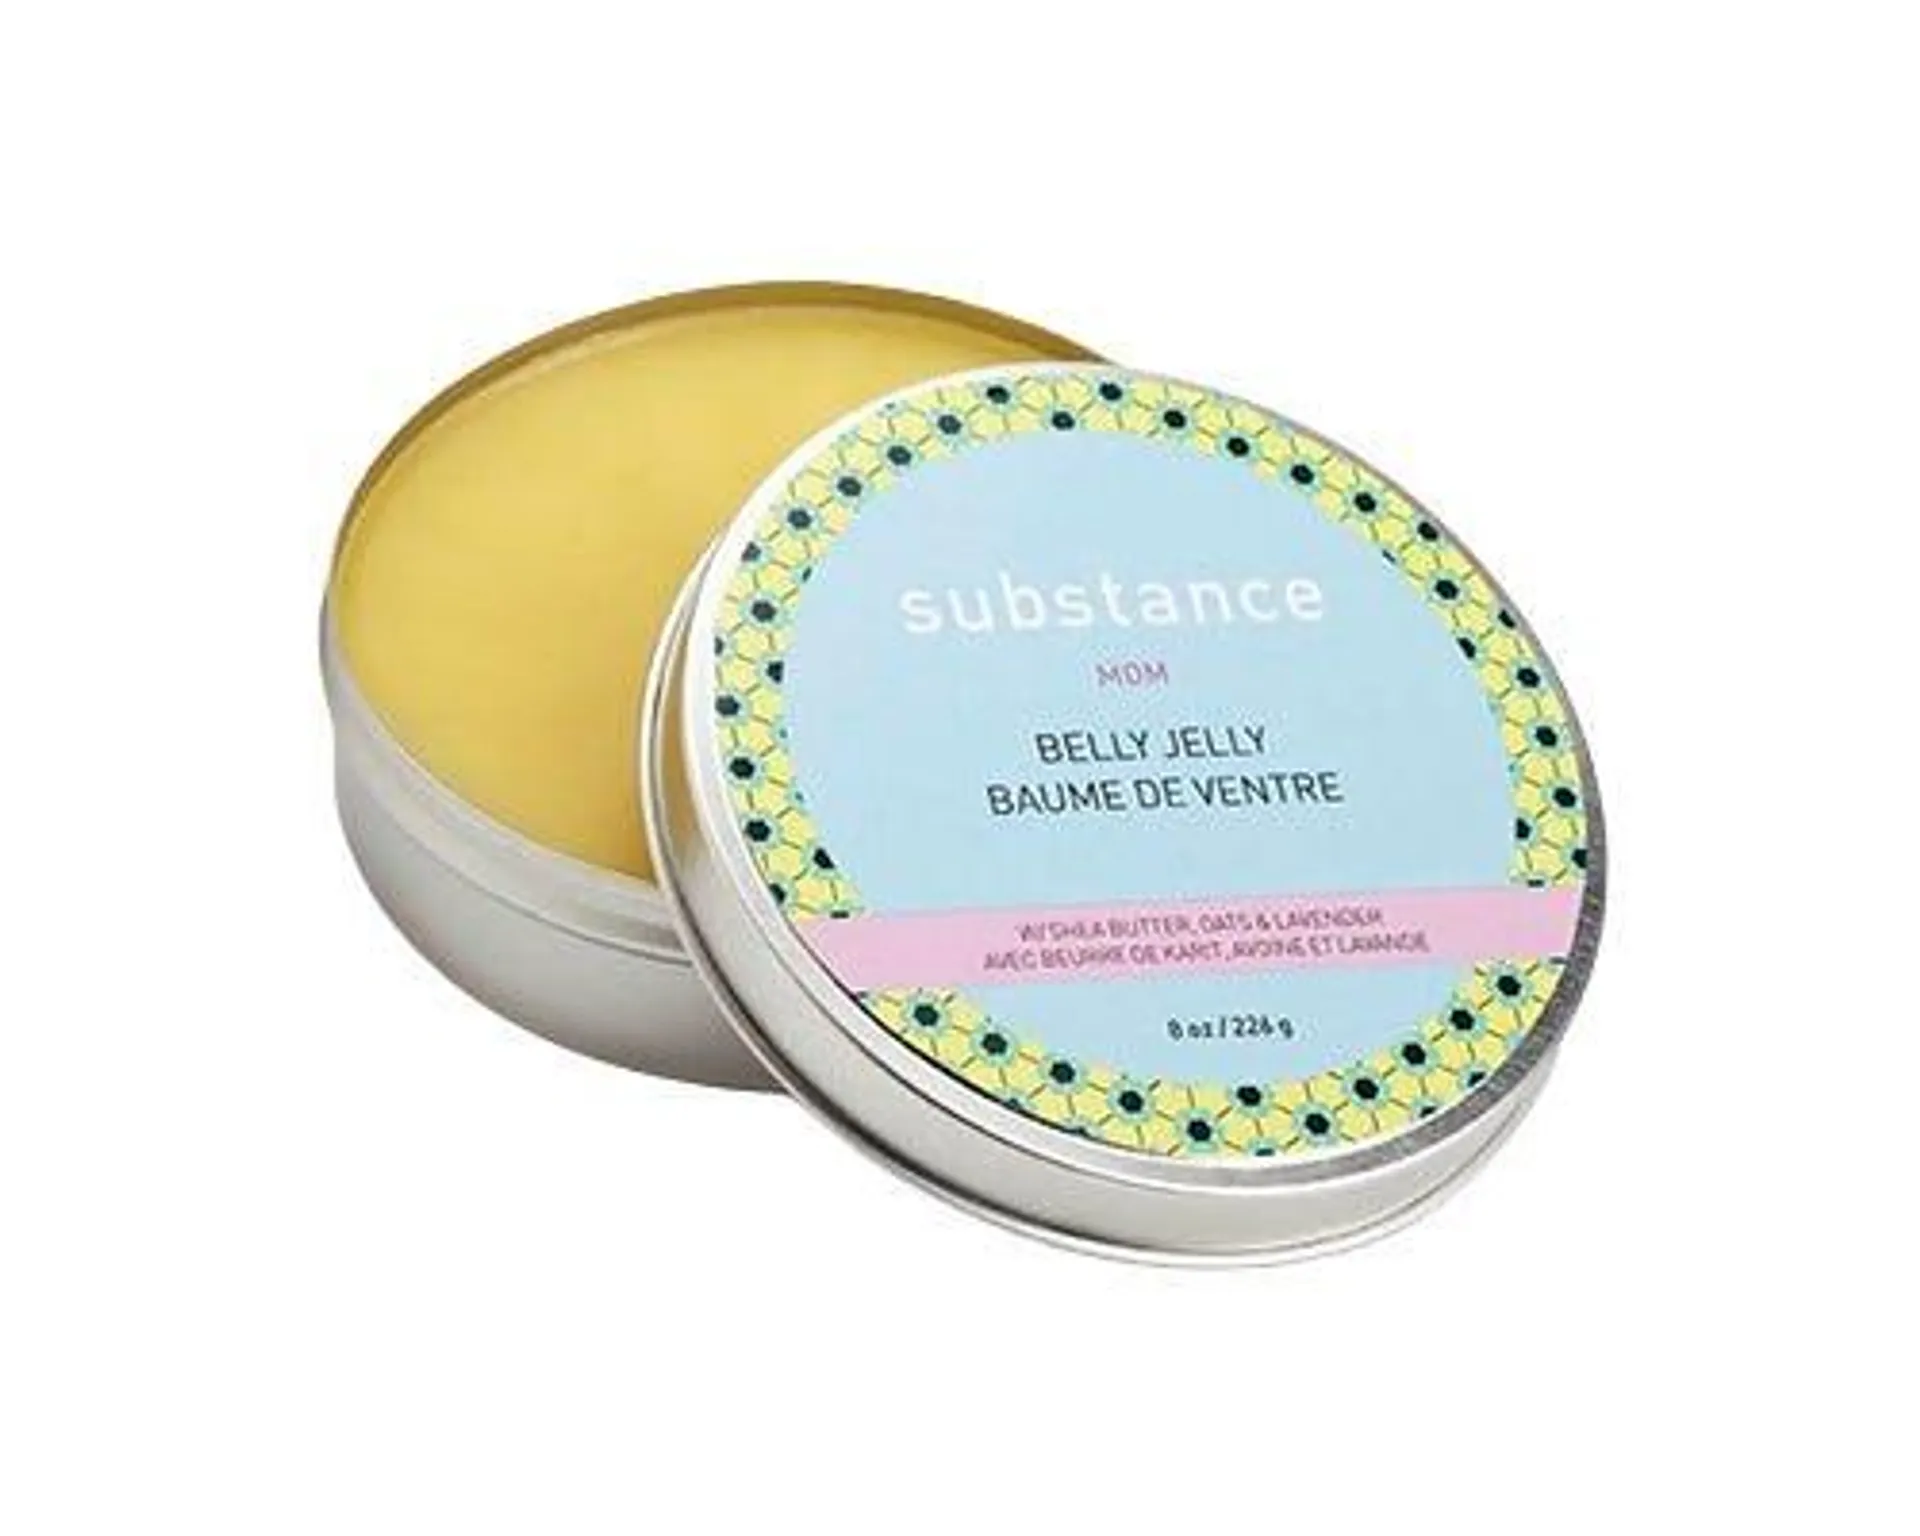 Substance Mom Belly Jelly 226g